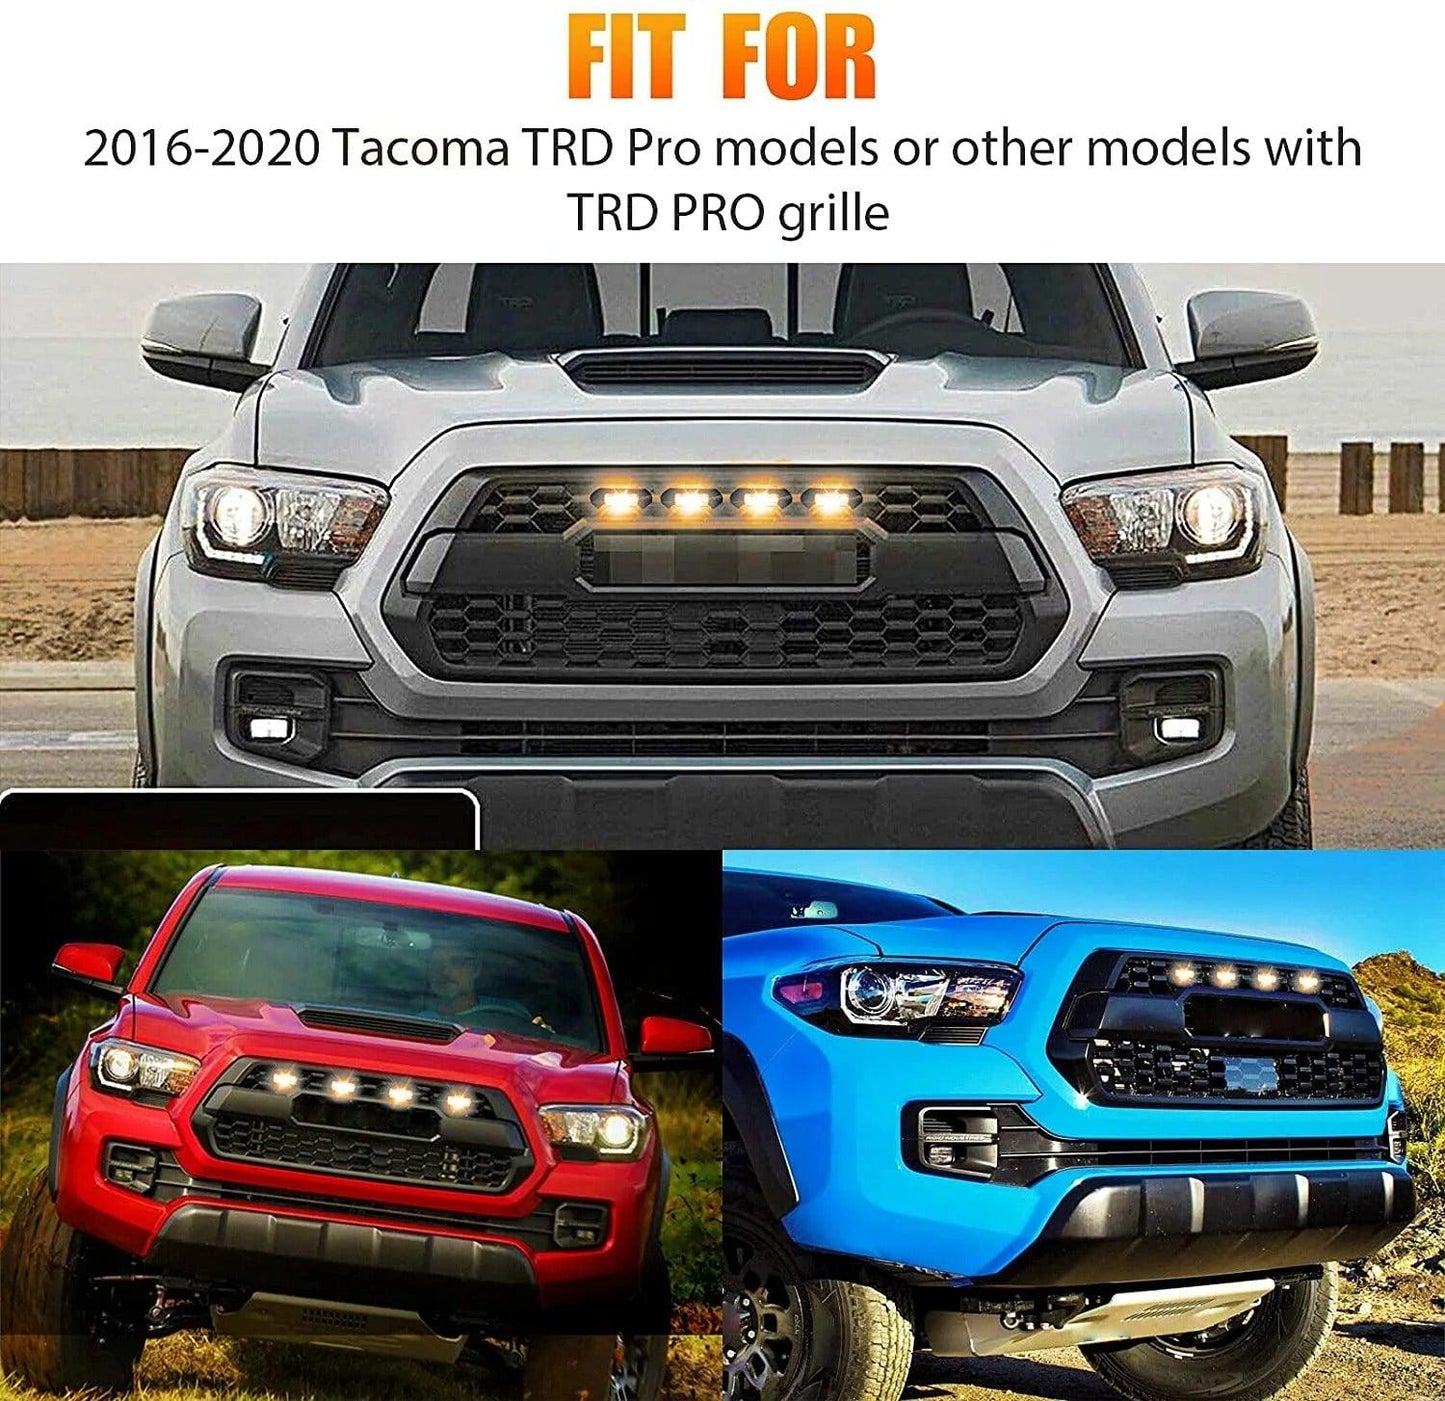 Trd Front Grill for Toyota Tacoma 2016, 2017, 2018, 2019, 2020 2021 BLACK W/ LED Amber Lights - trucfri